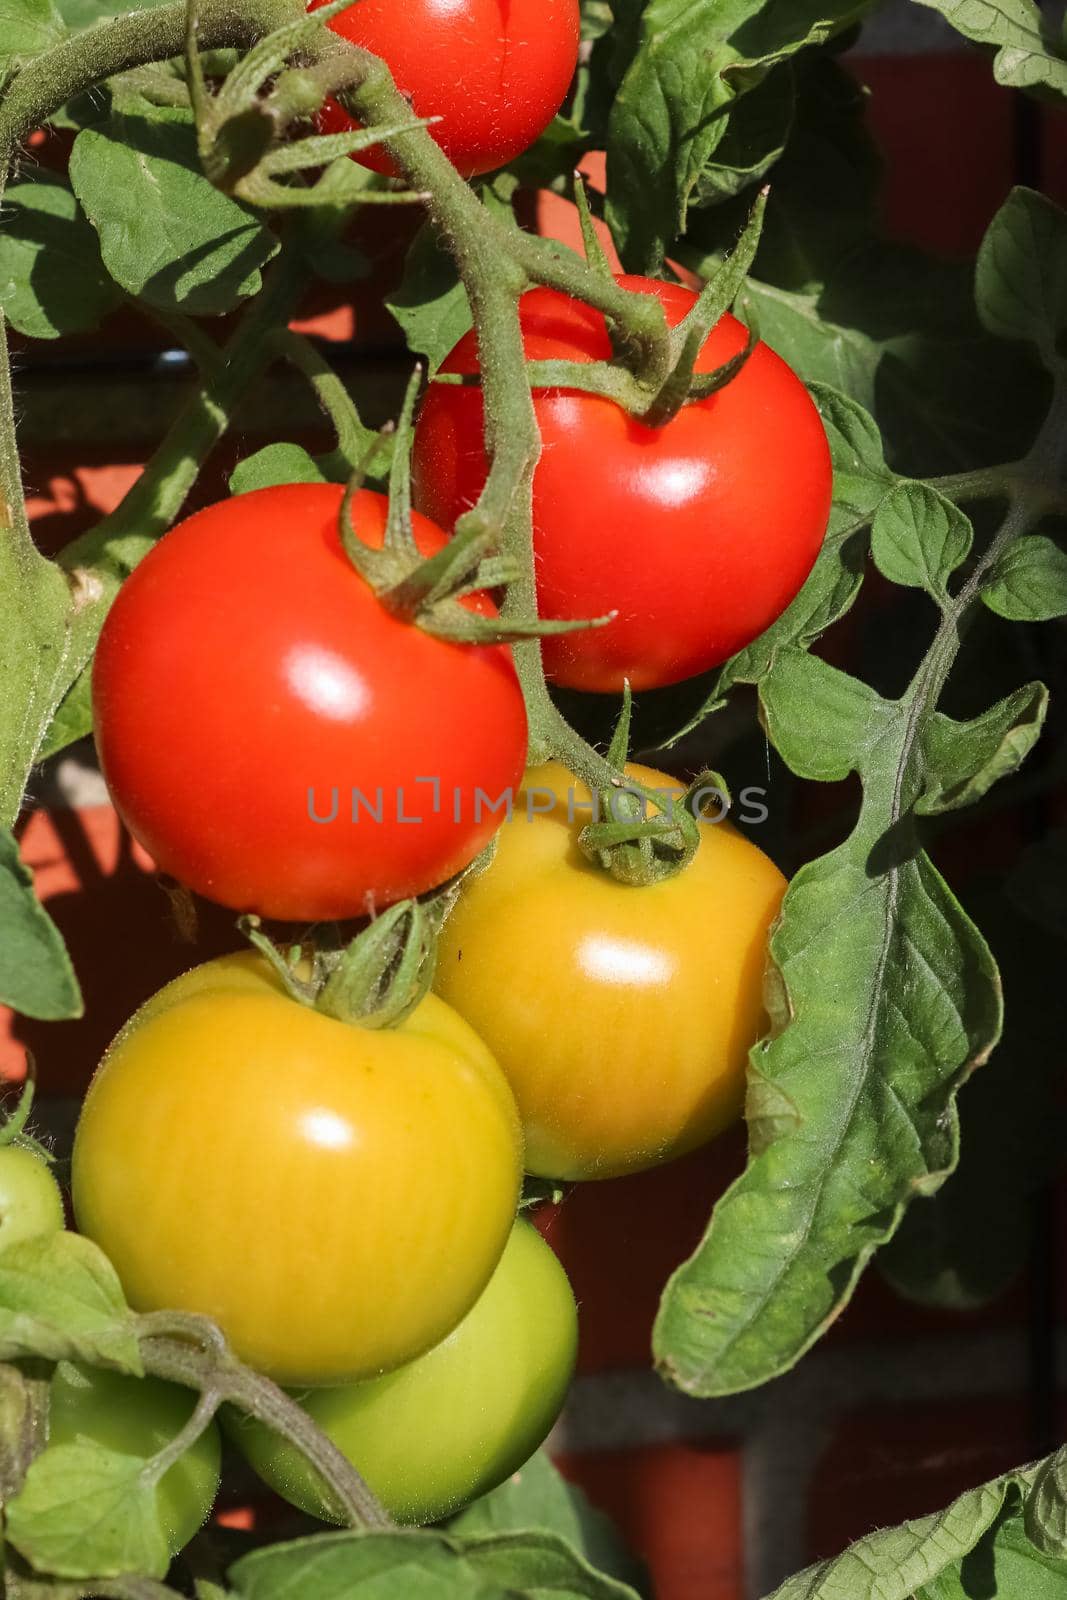 Some tomatoes on a bush growing at the wall of a house. Agriculture concept.